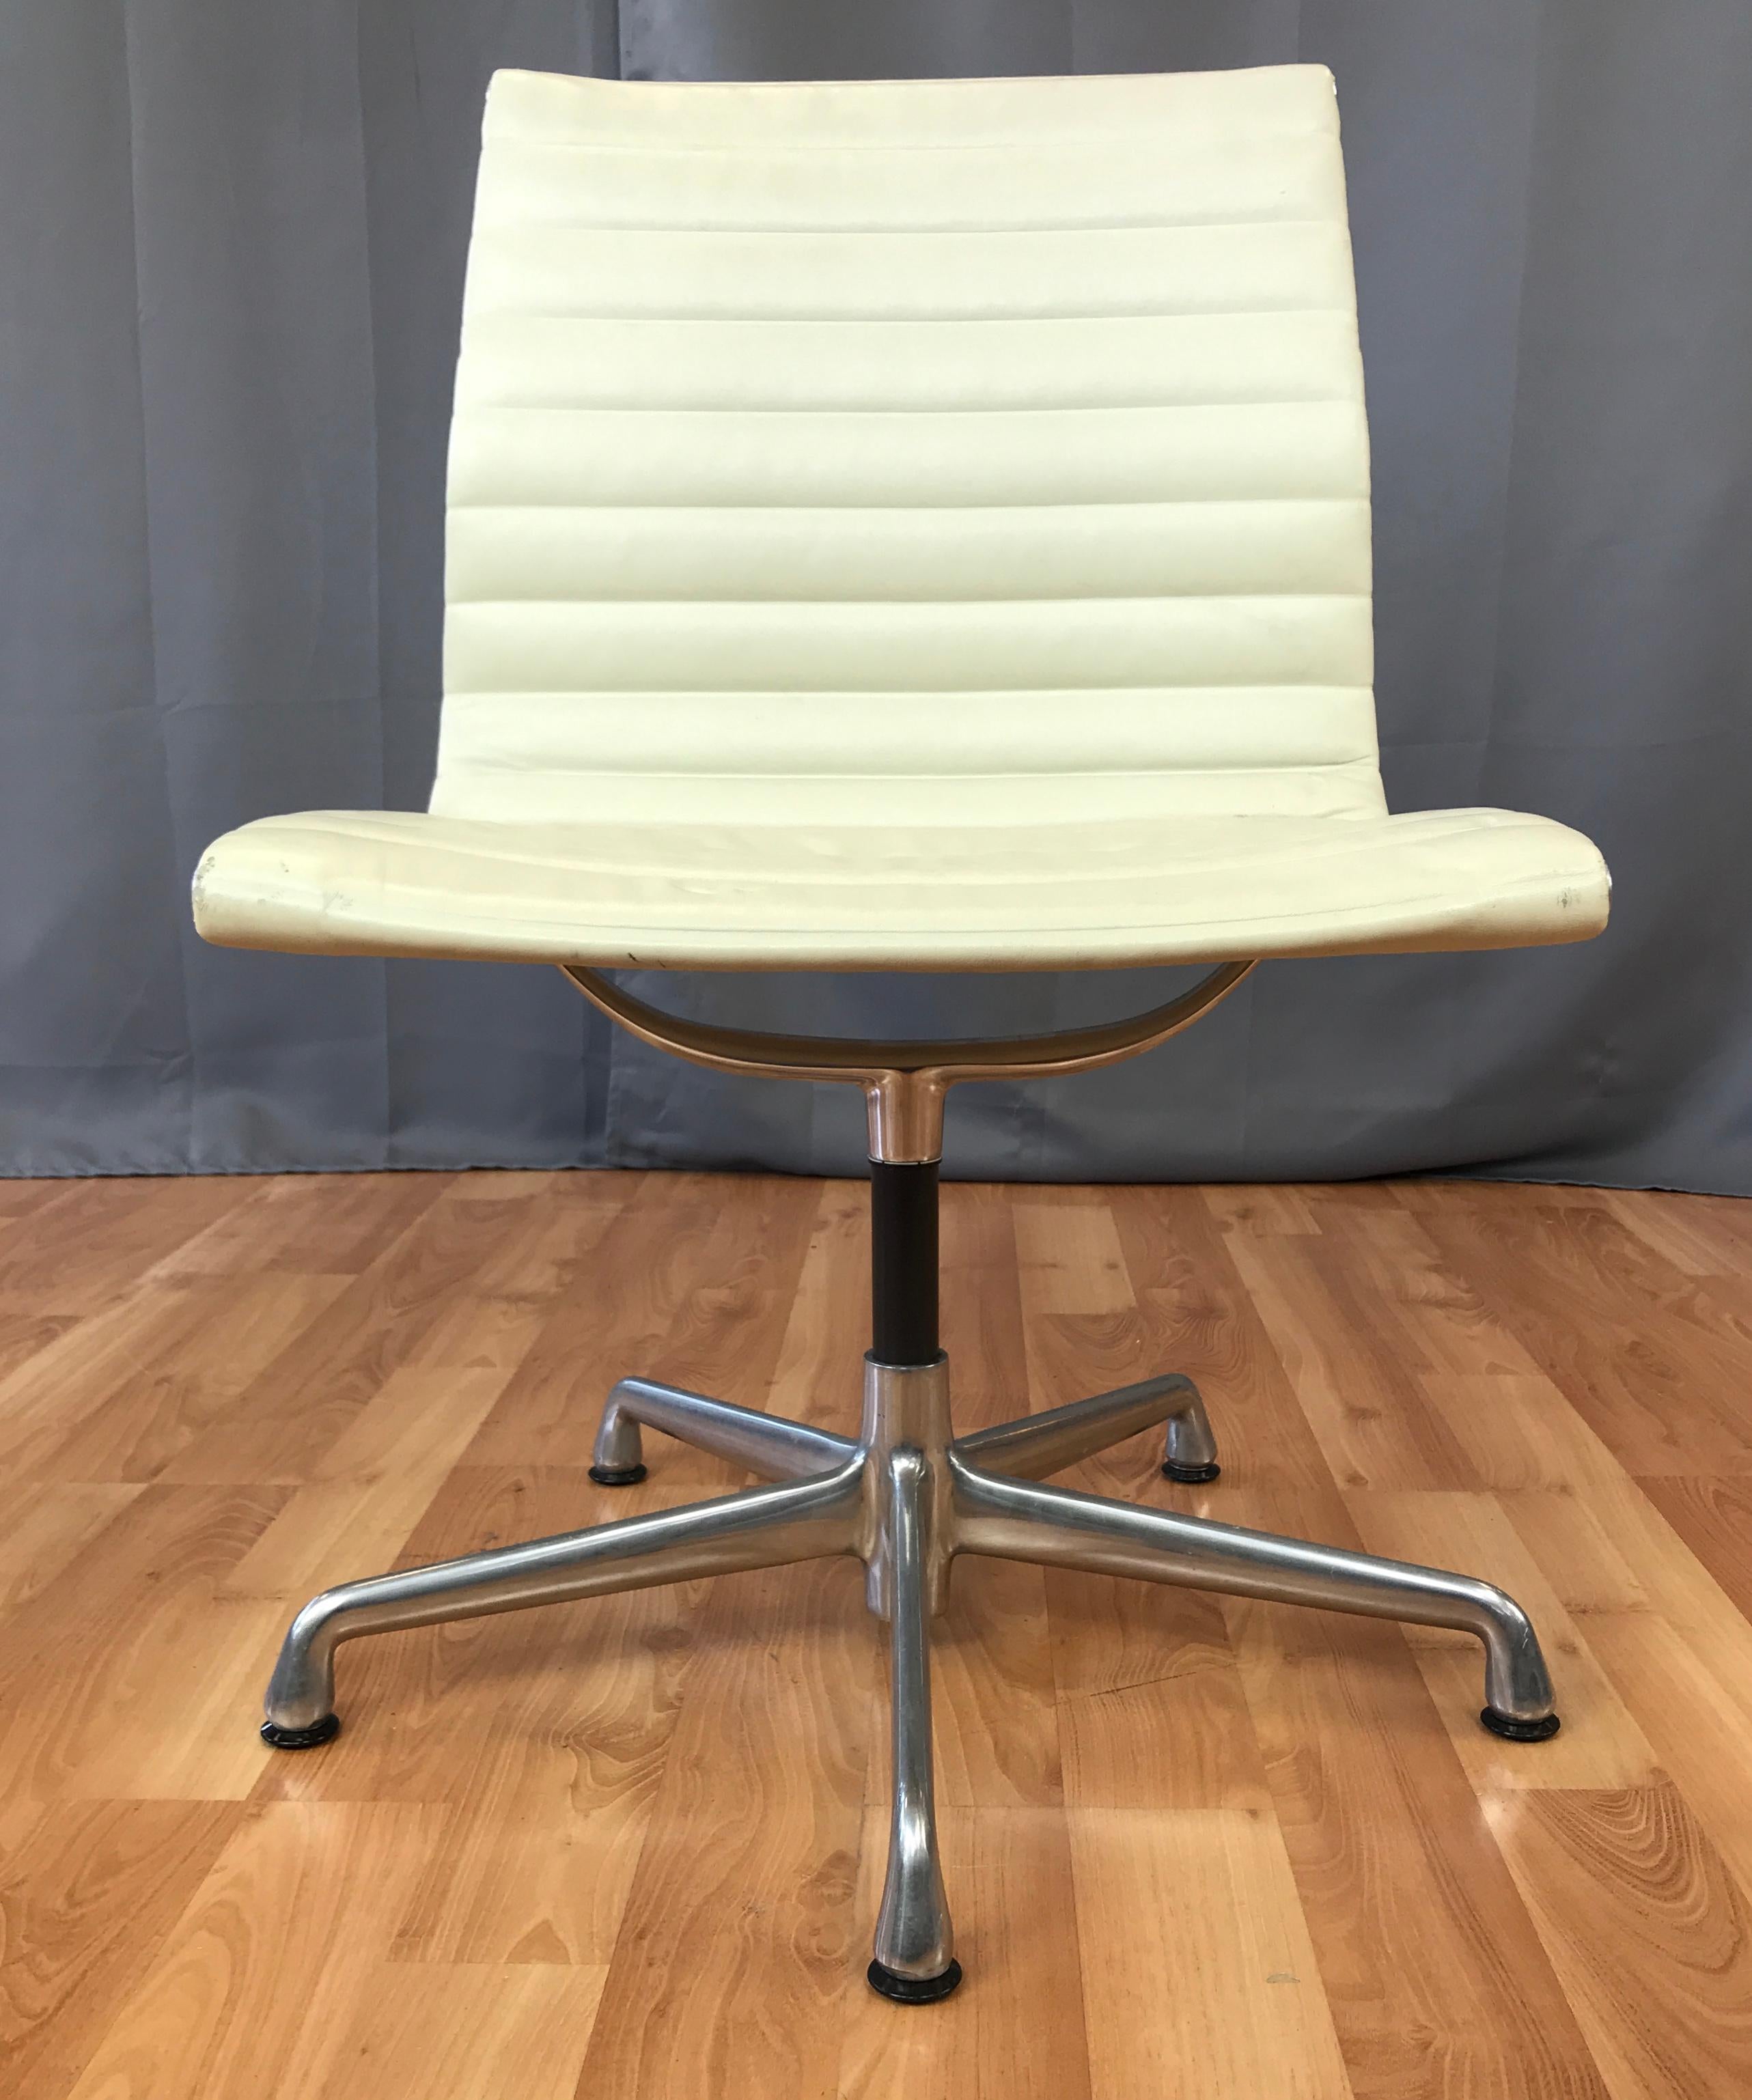 Design by Charles and Ray Eames, aluminum group side chair for Herman Miller.
First designed in 1957, this one is newer circa 2007, with cream color leather. Has five star base.